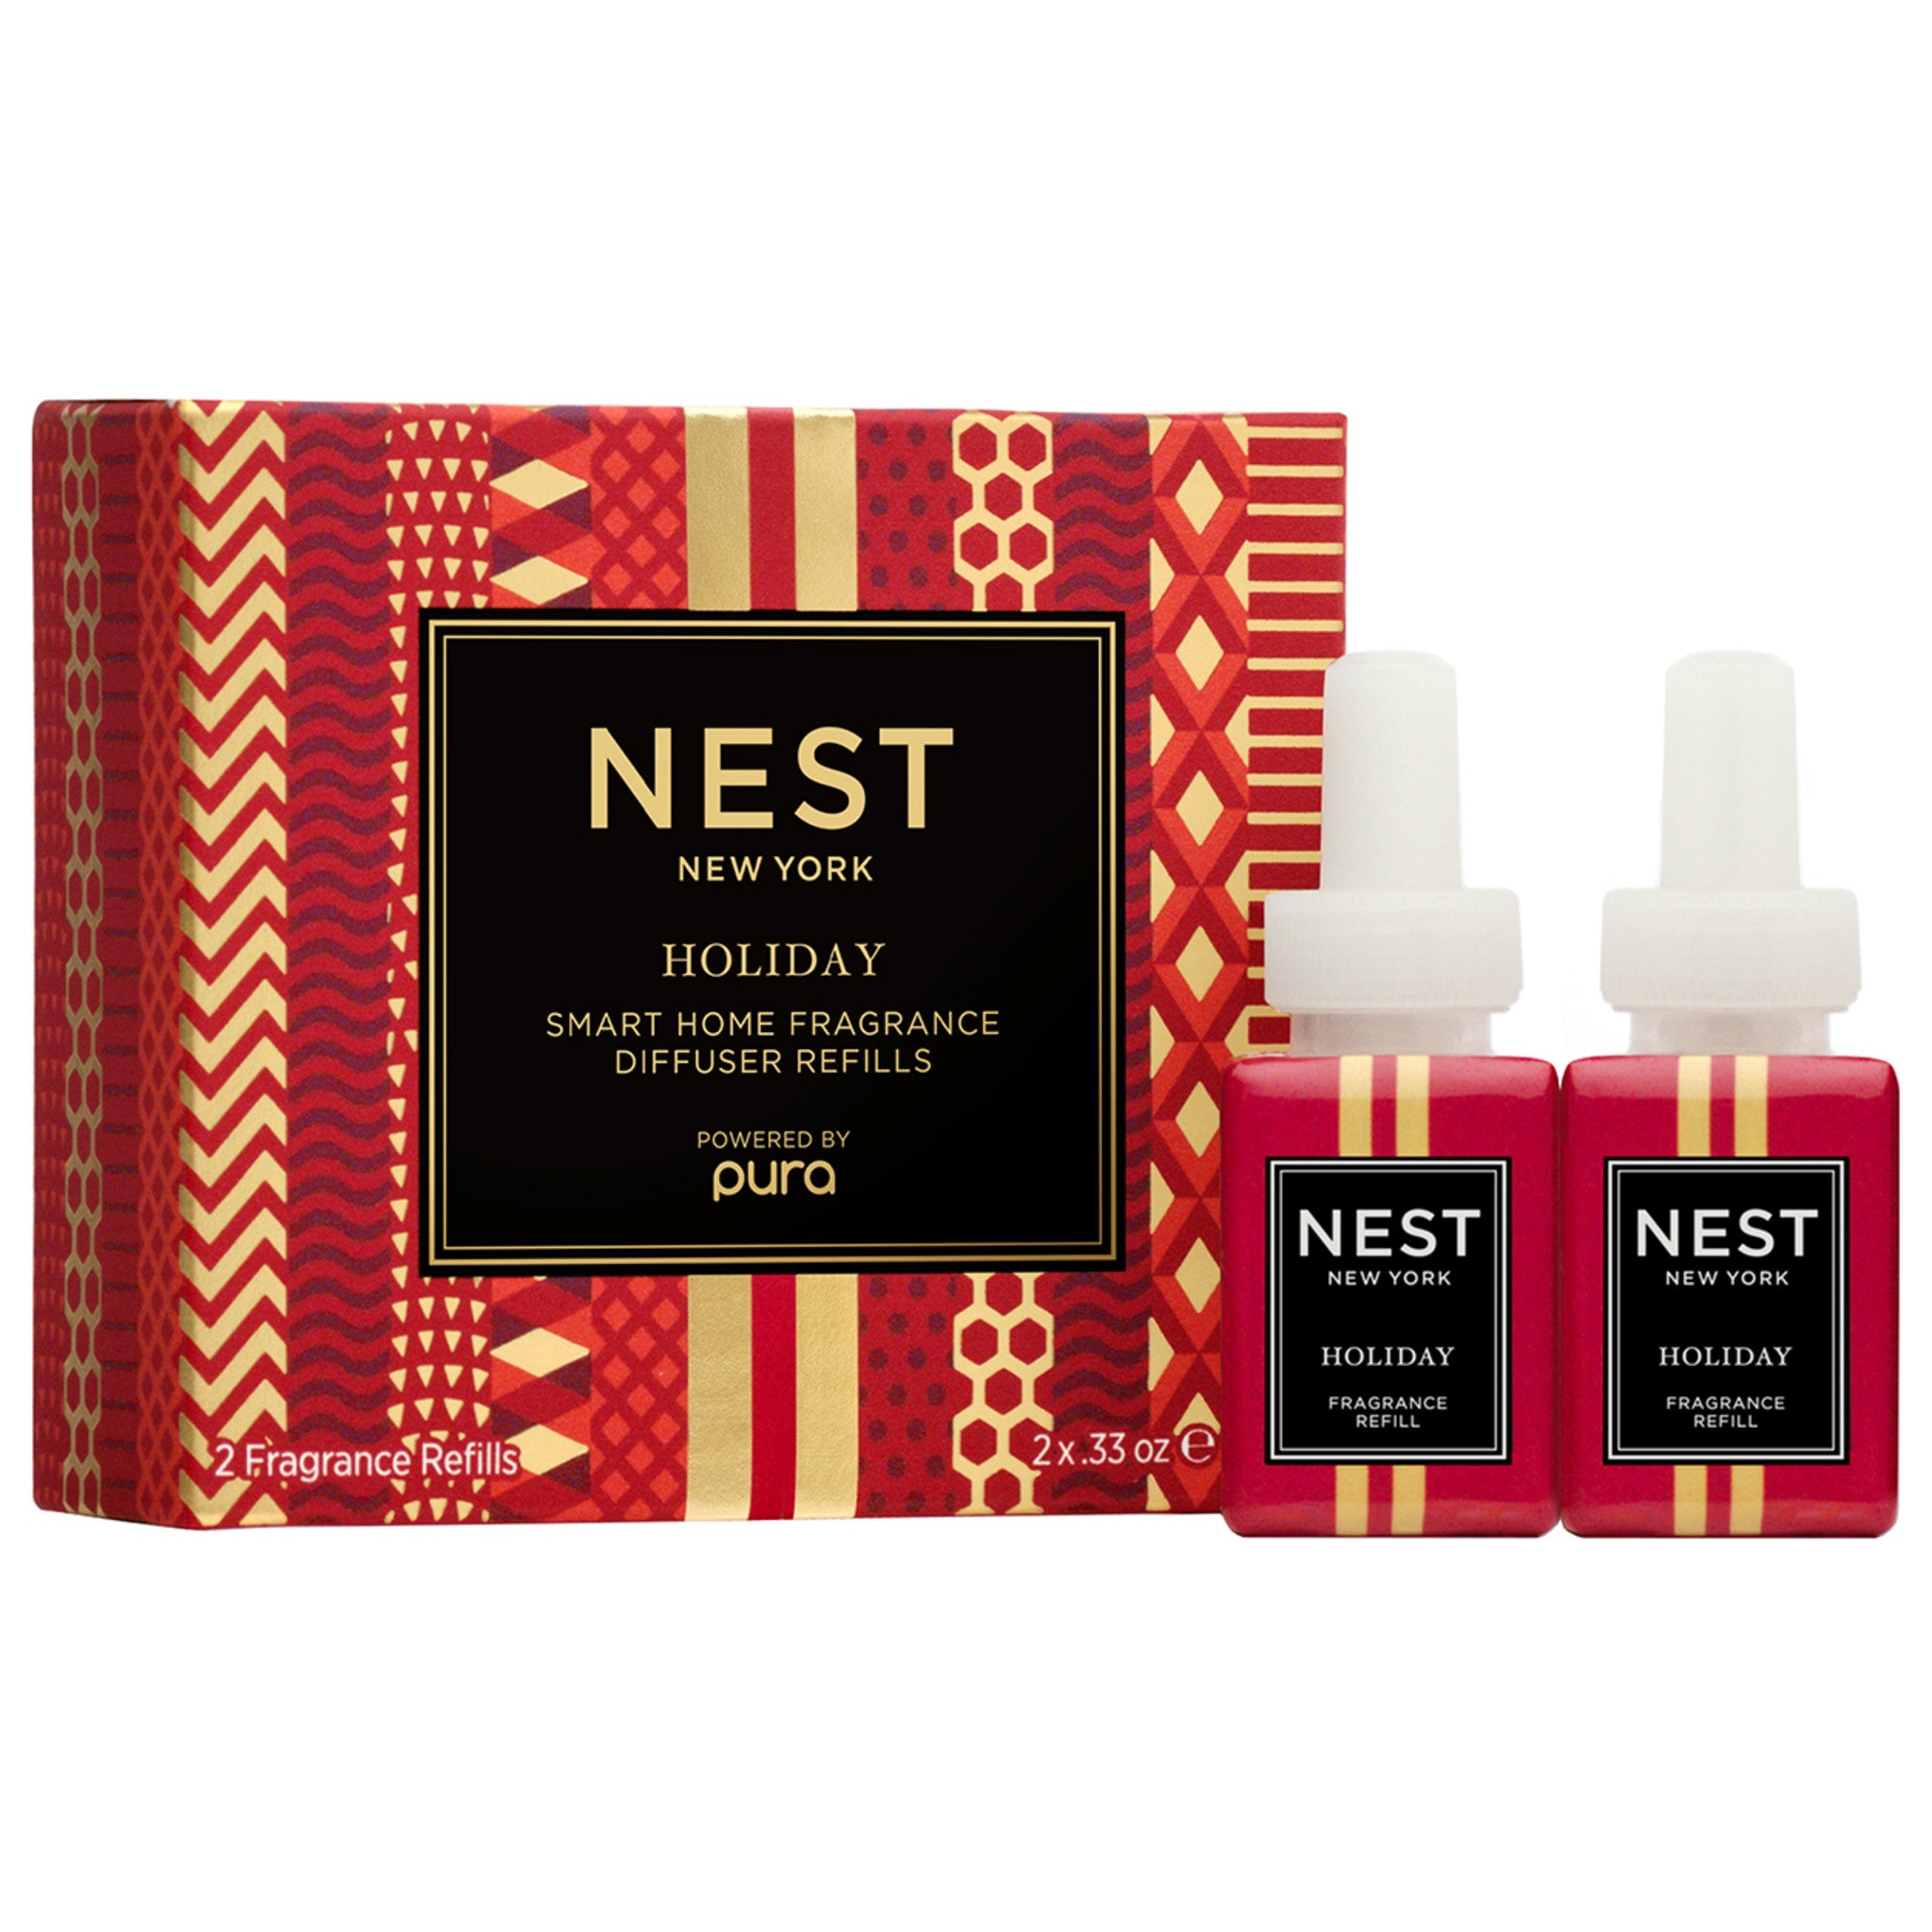 Limited edition Nest Holiday Pura Refill main image.